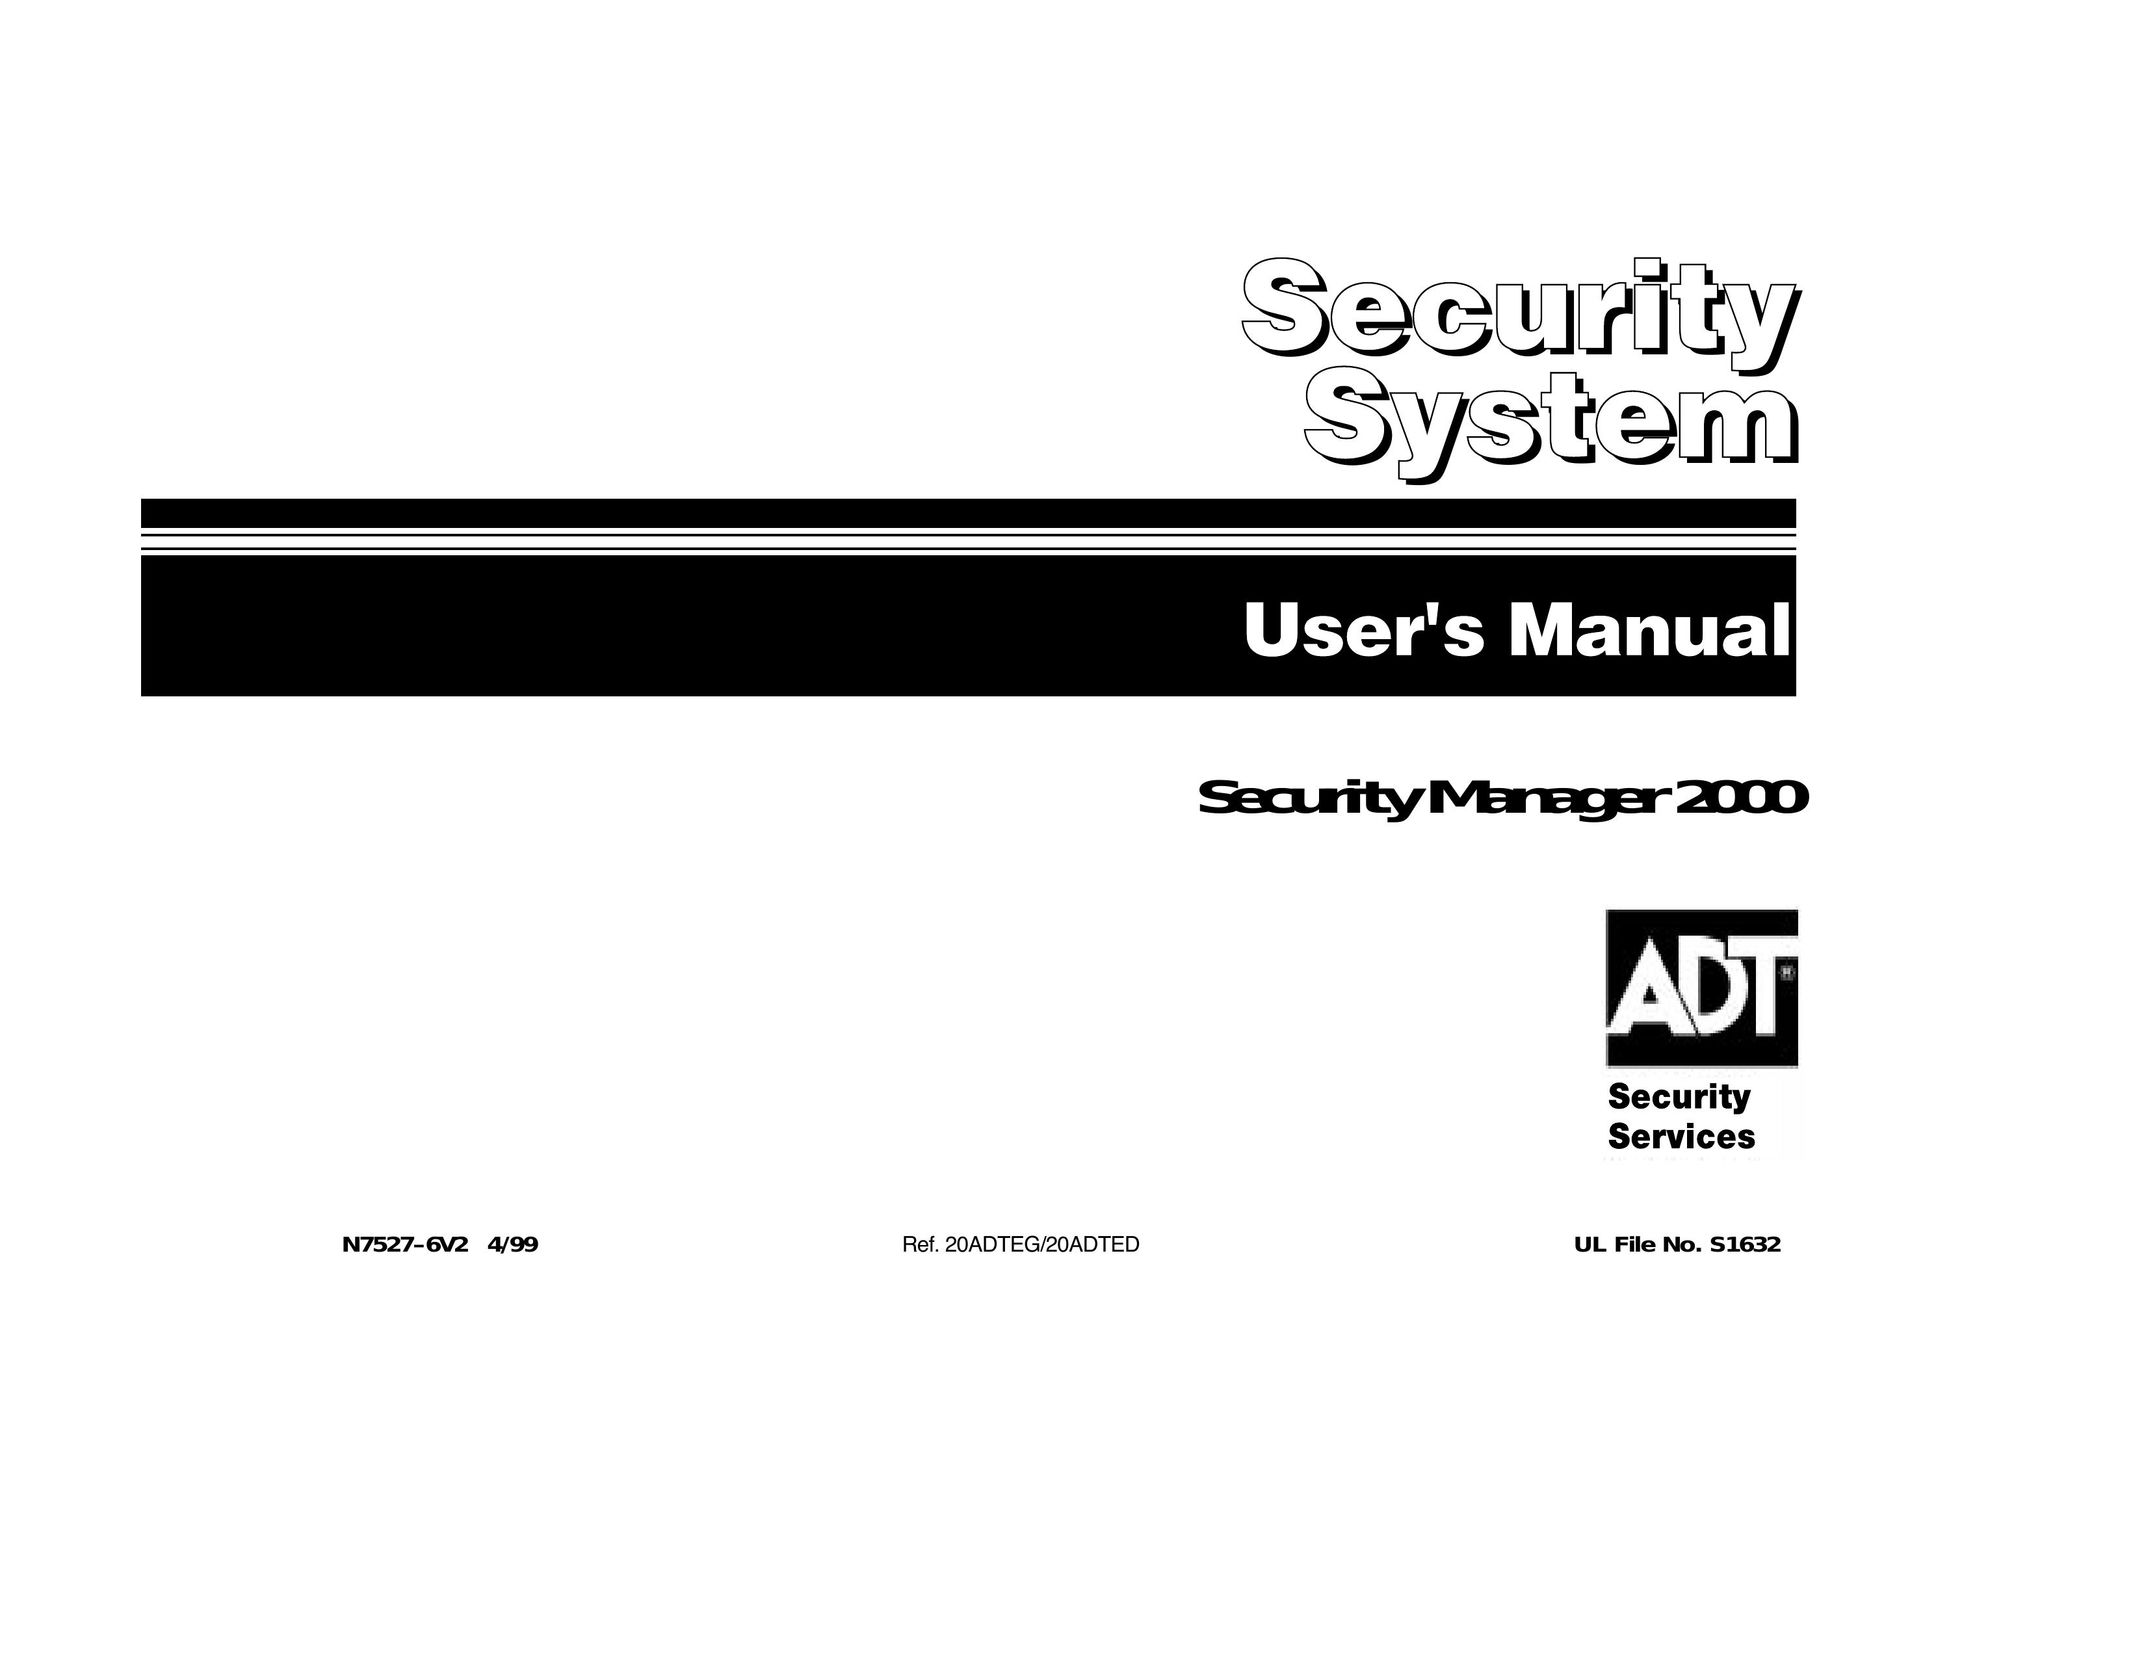 ADT Security Services Security Manager 2000 Home Security System User Manual